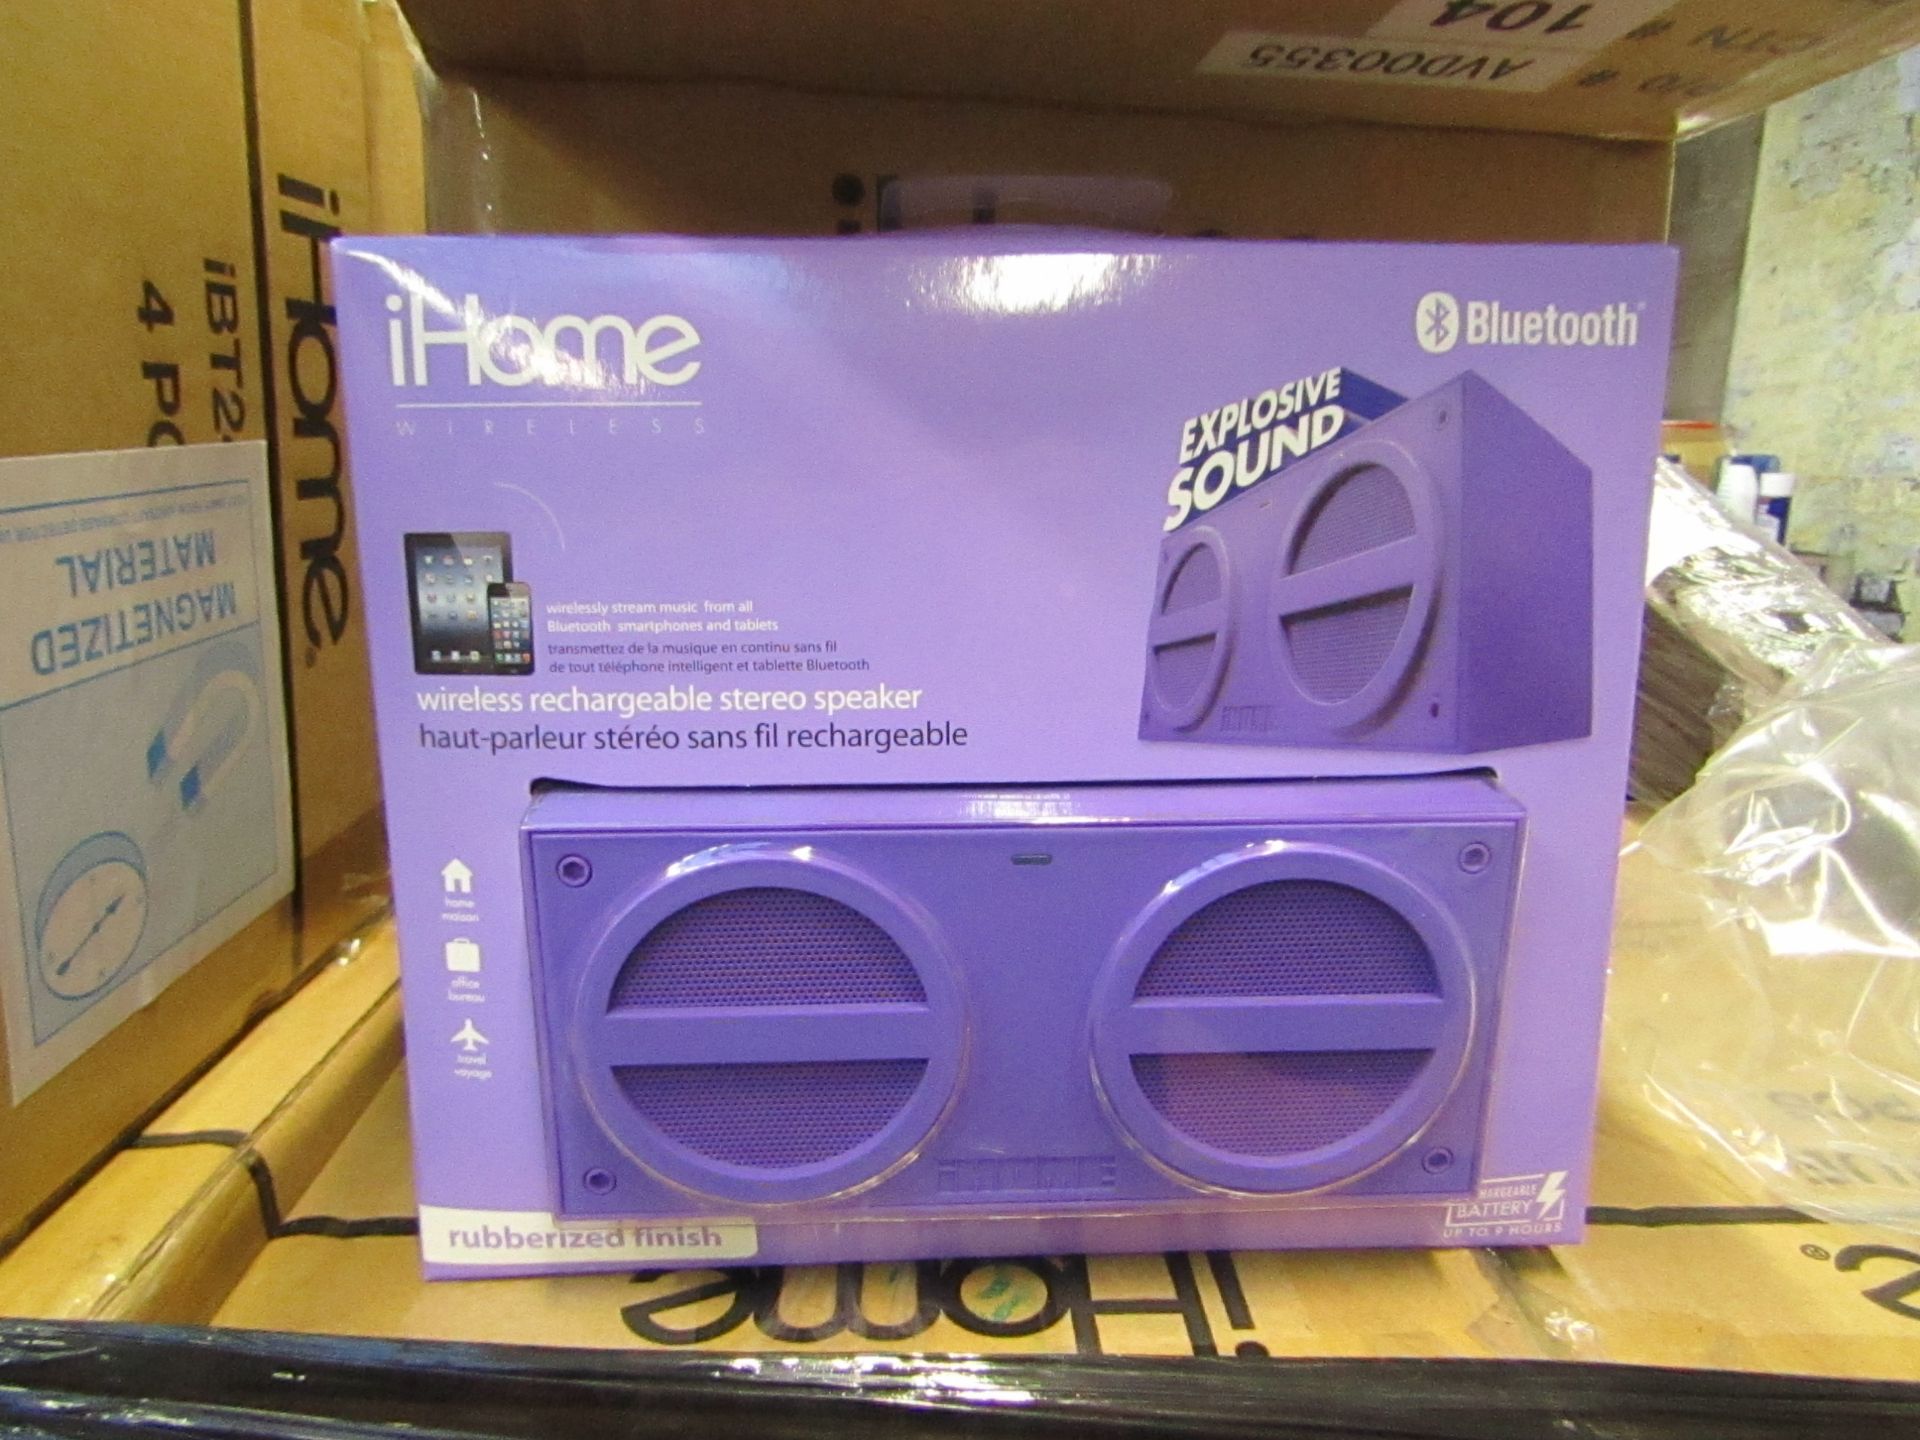 Ihome wireless rechargeable stereo speaker - New & Boxed